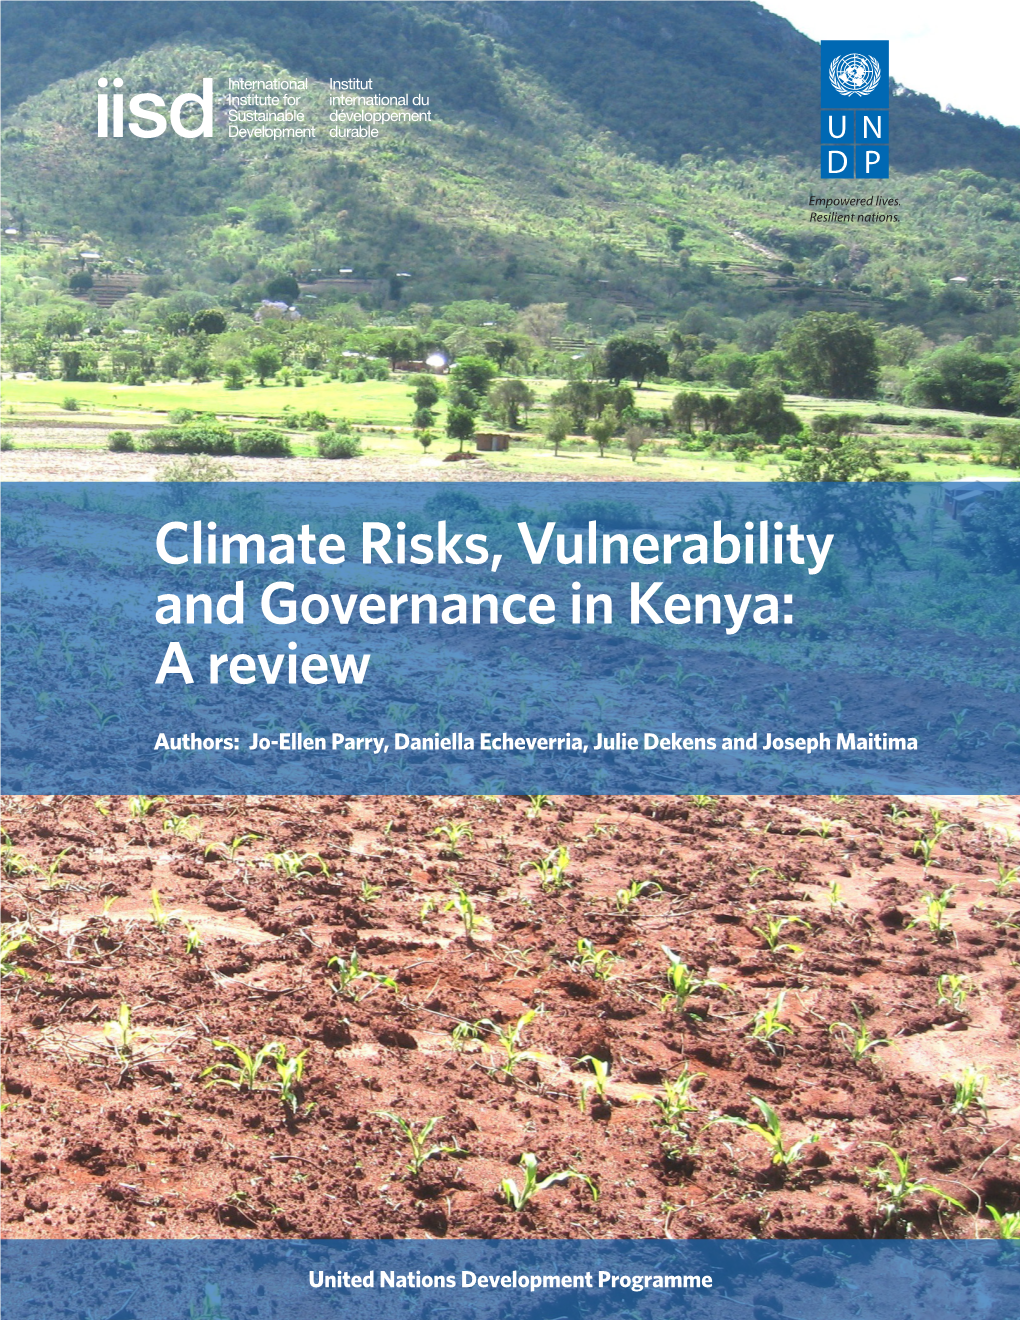 Climate Risks, Vulnerability and Governance in Kenya: a Review